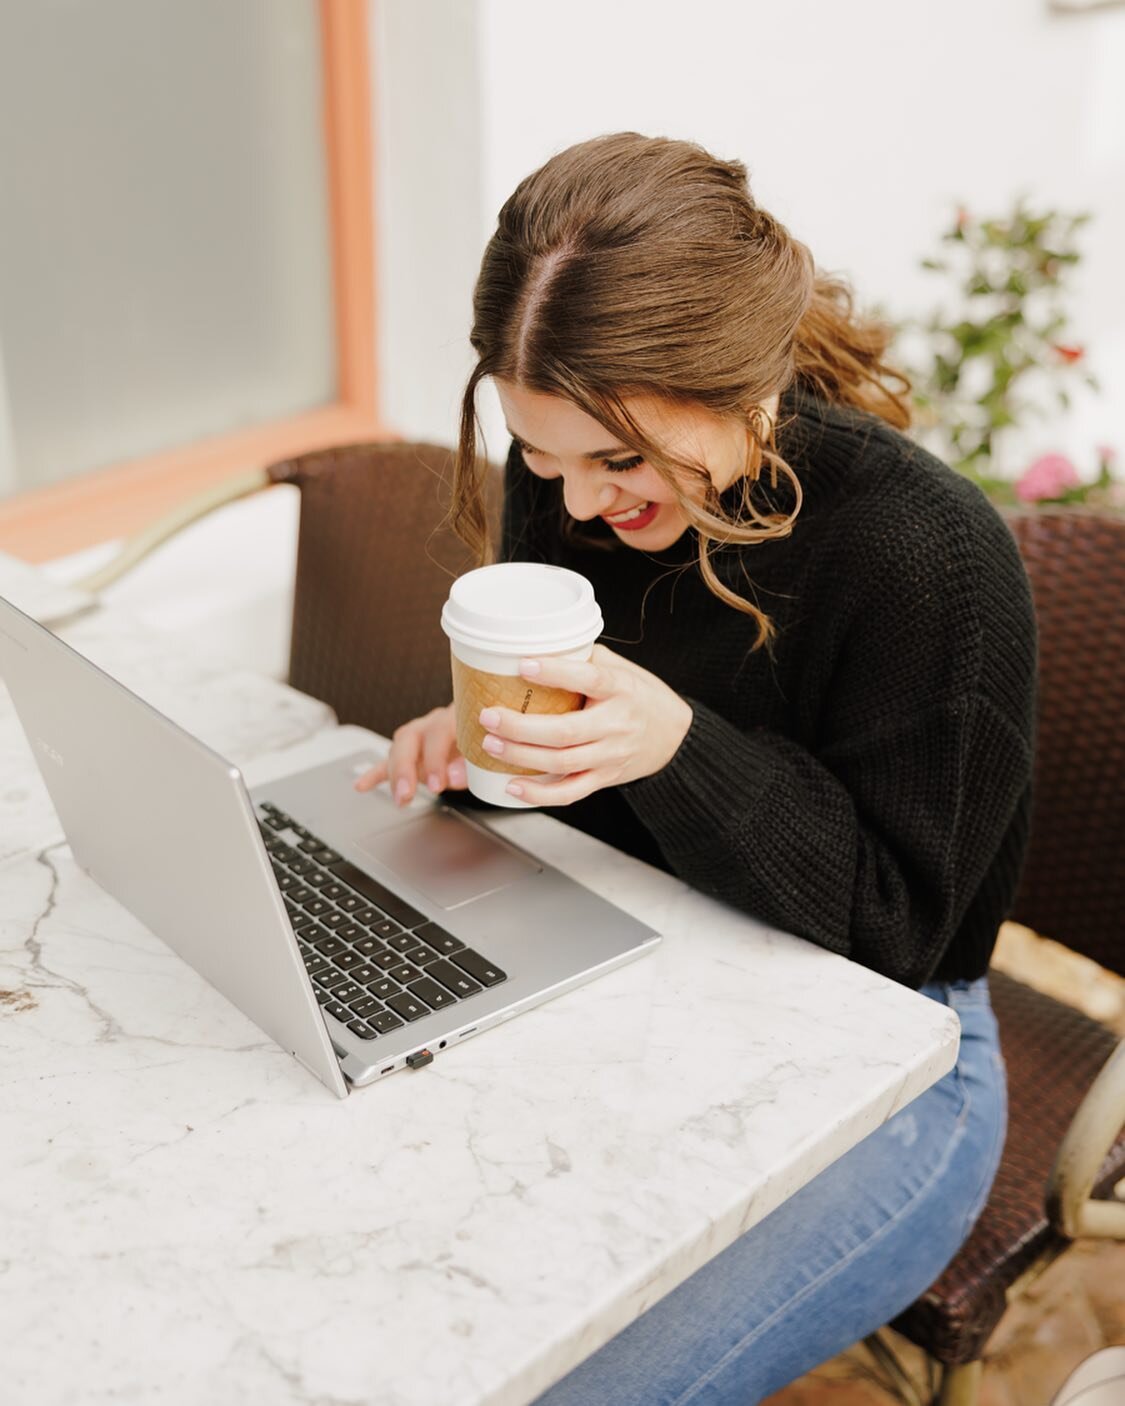 Usually you can find me with my coffee in hand, hair in a pony, and on my laptop getting all of your wedding details confirmed to perfection. Did you know that I offer everything from month-of coordination all the way to full planning? And that all o